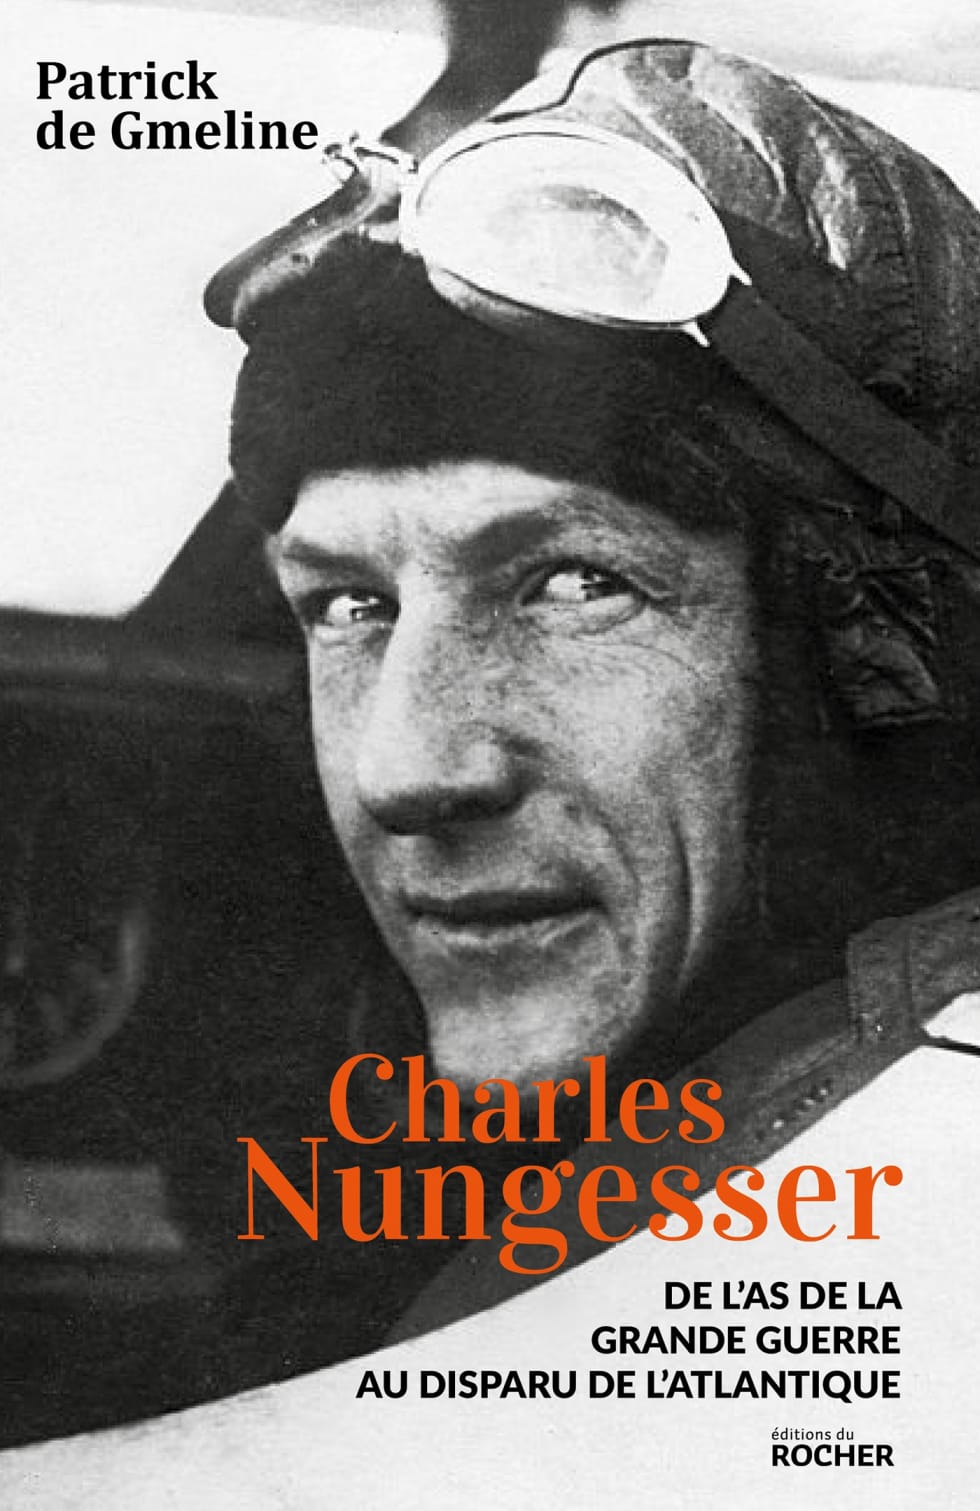 Bookcover “Charles Nungesser, from Flying Ace of the Great War to disappearance across the Atlantic”